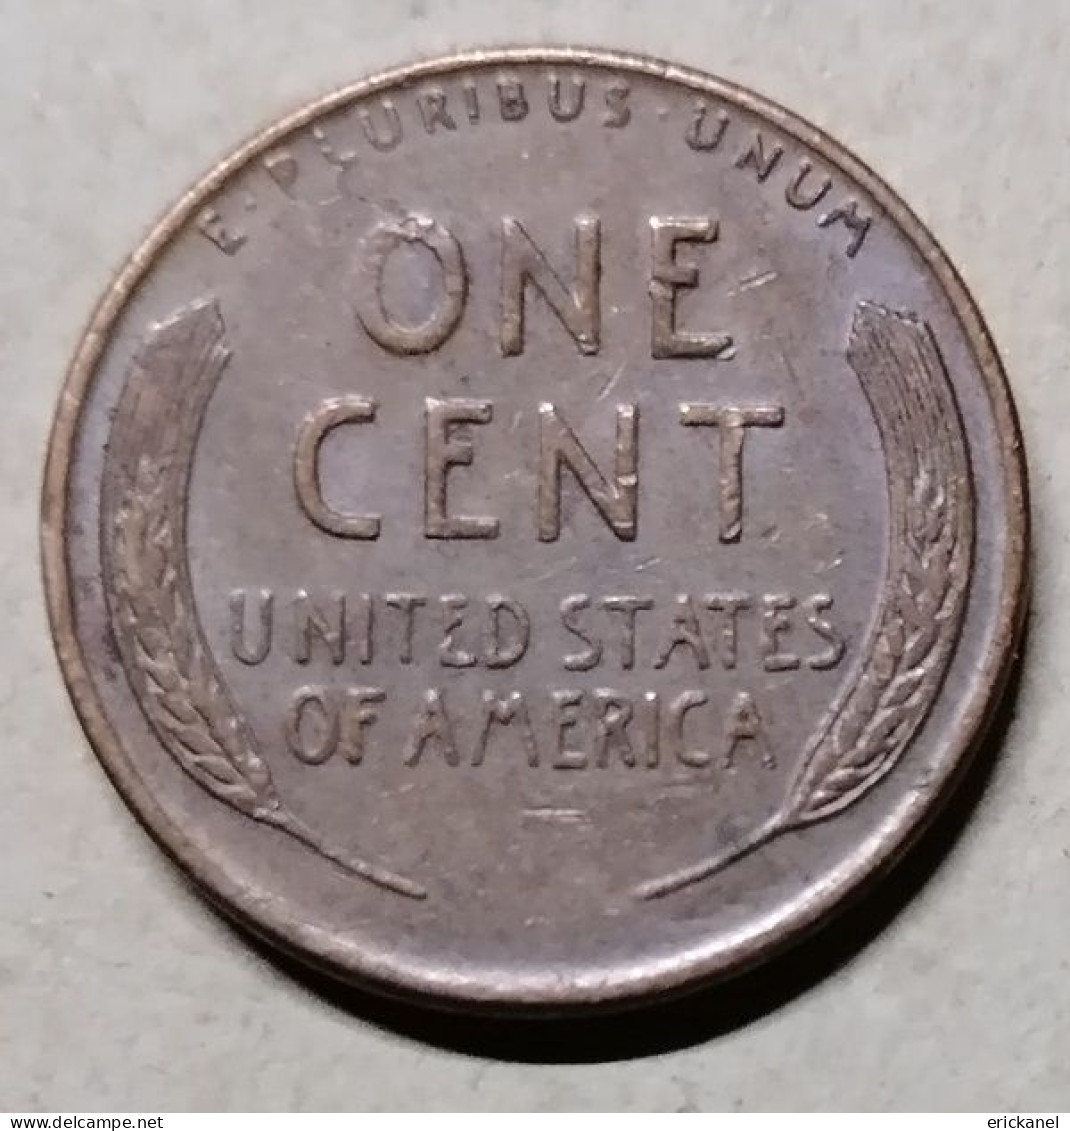 USA 1 CENT 1955 - 1909-1958: Lincoln, Wheat Ears Reverse